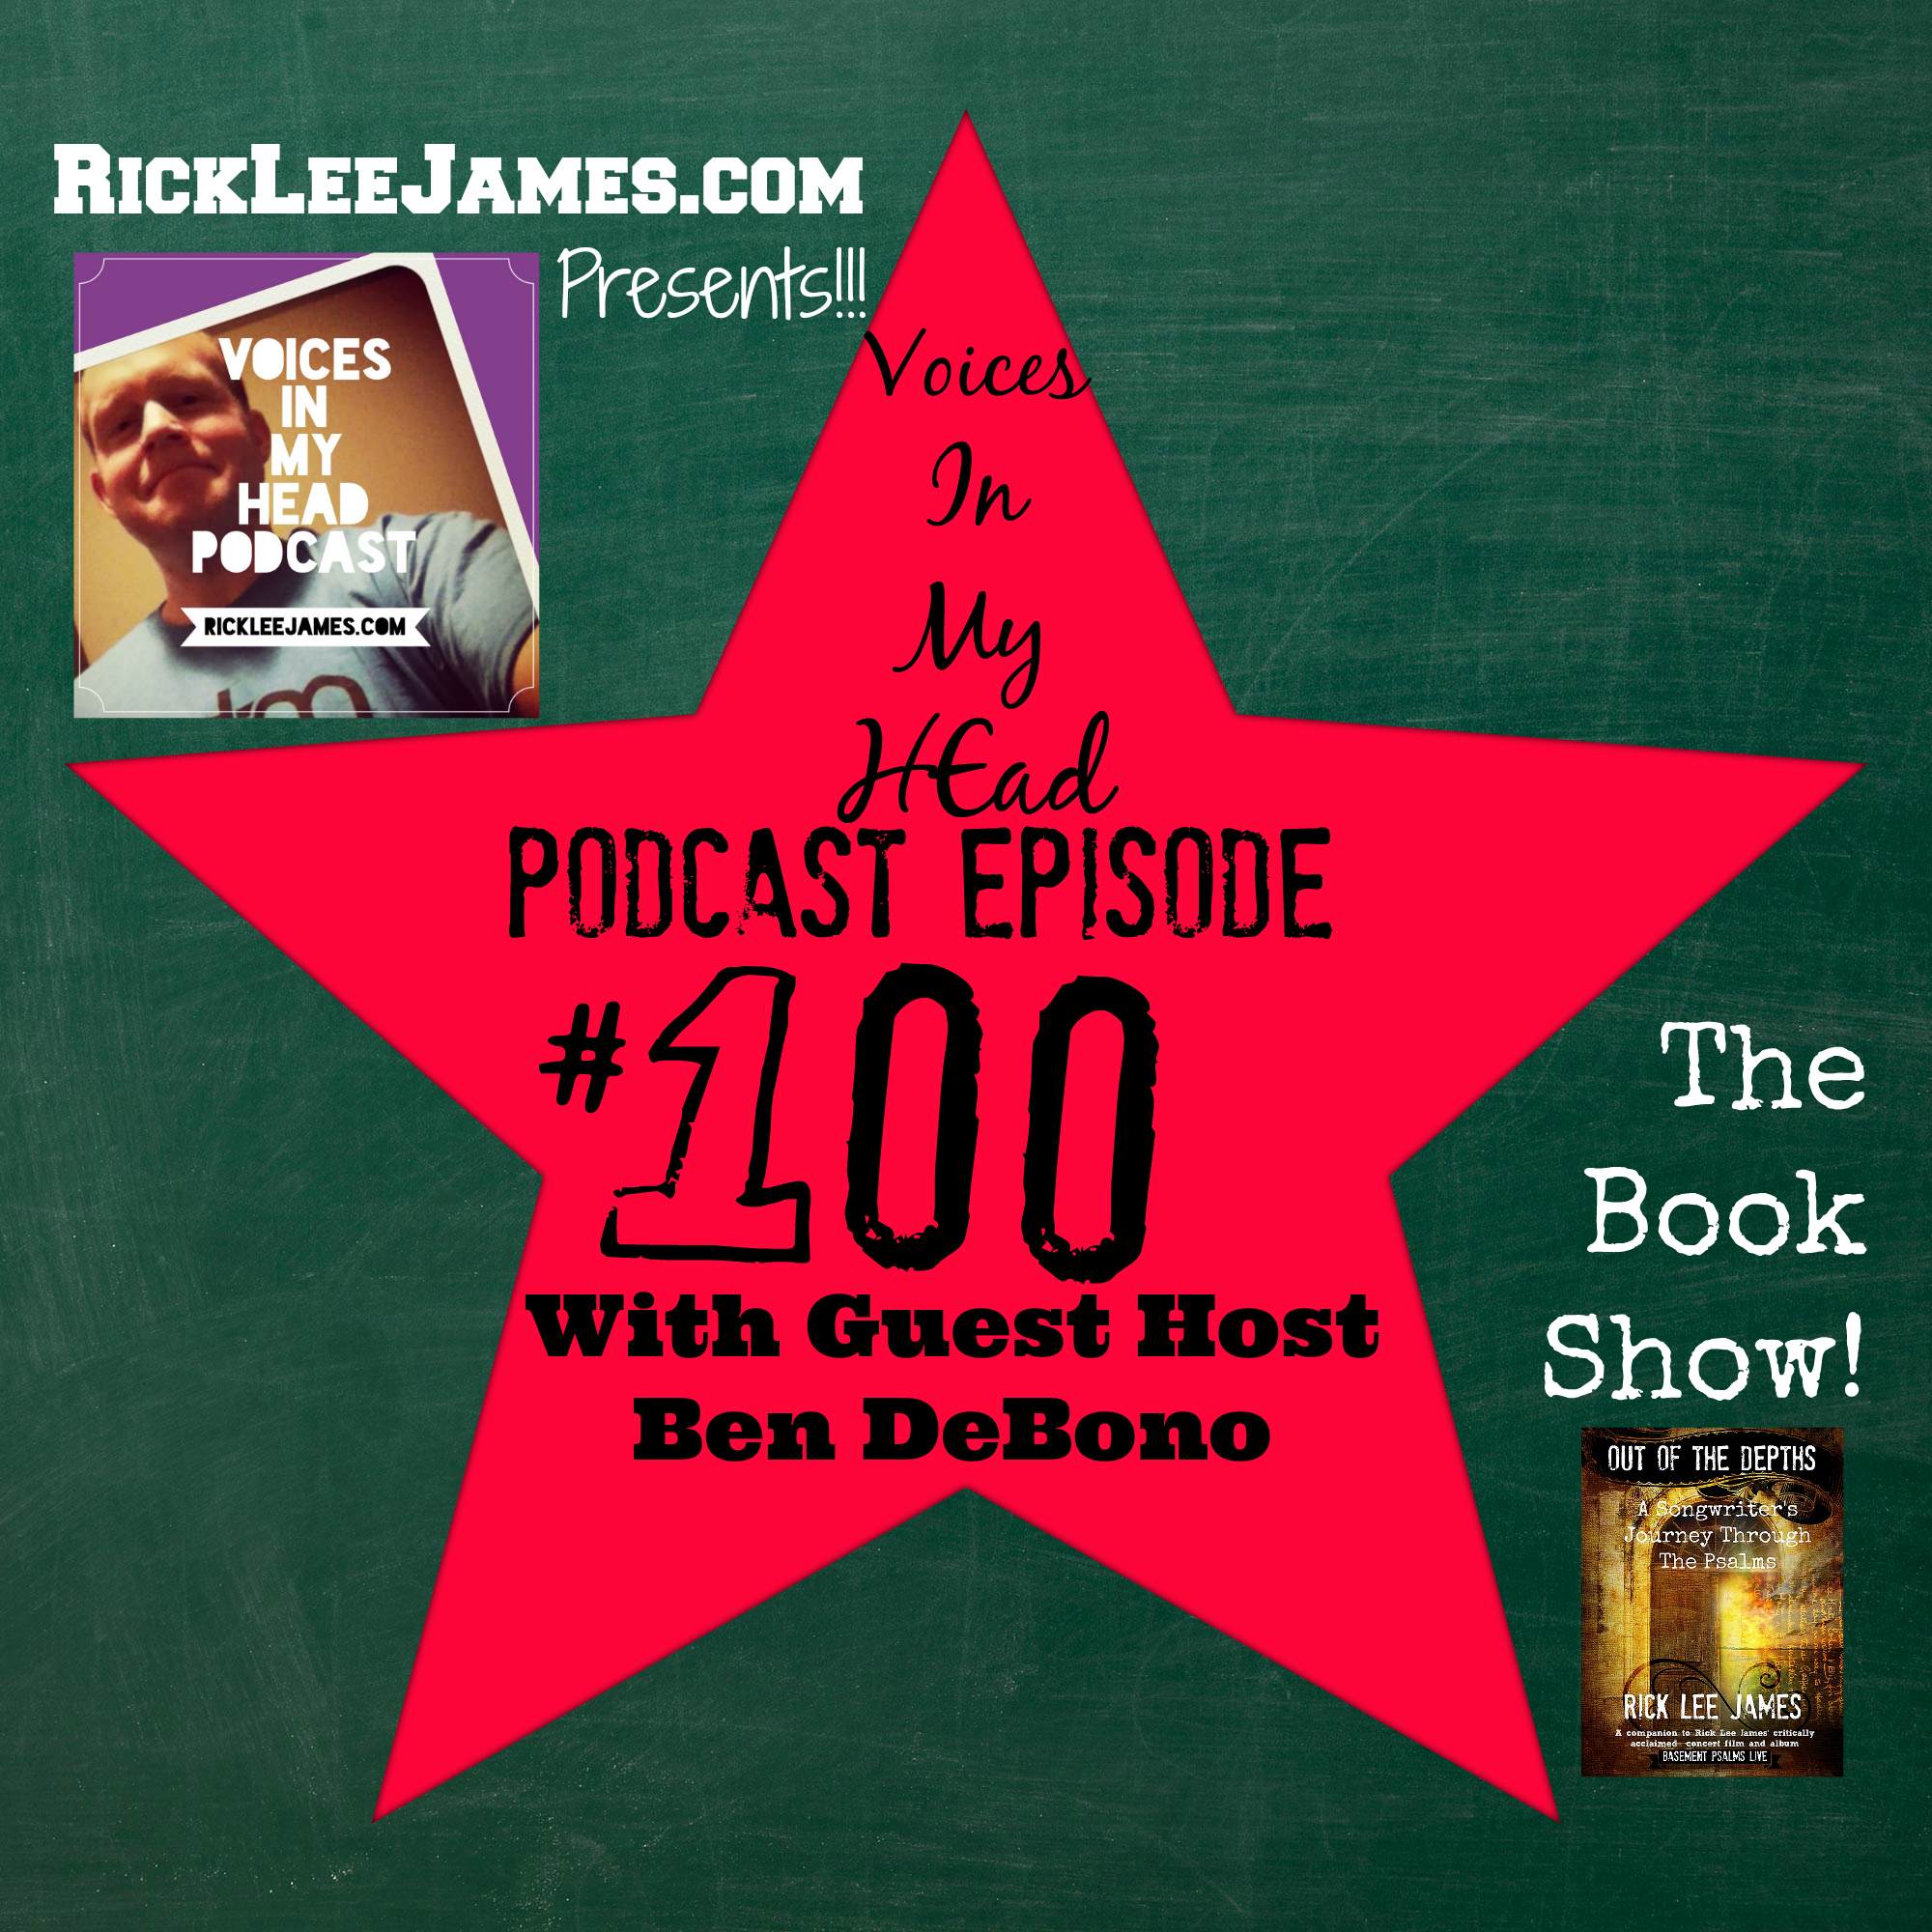 Podcast #100: The Book Show with Guest Host Ben DeBono